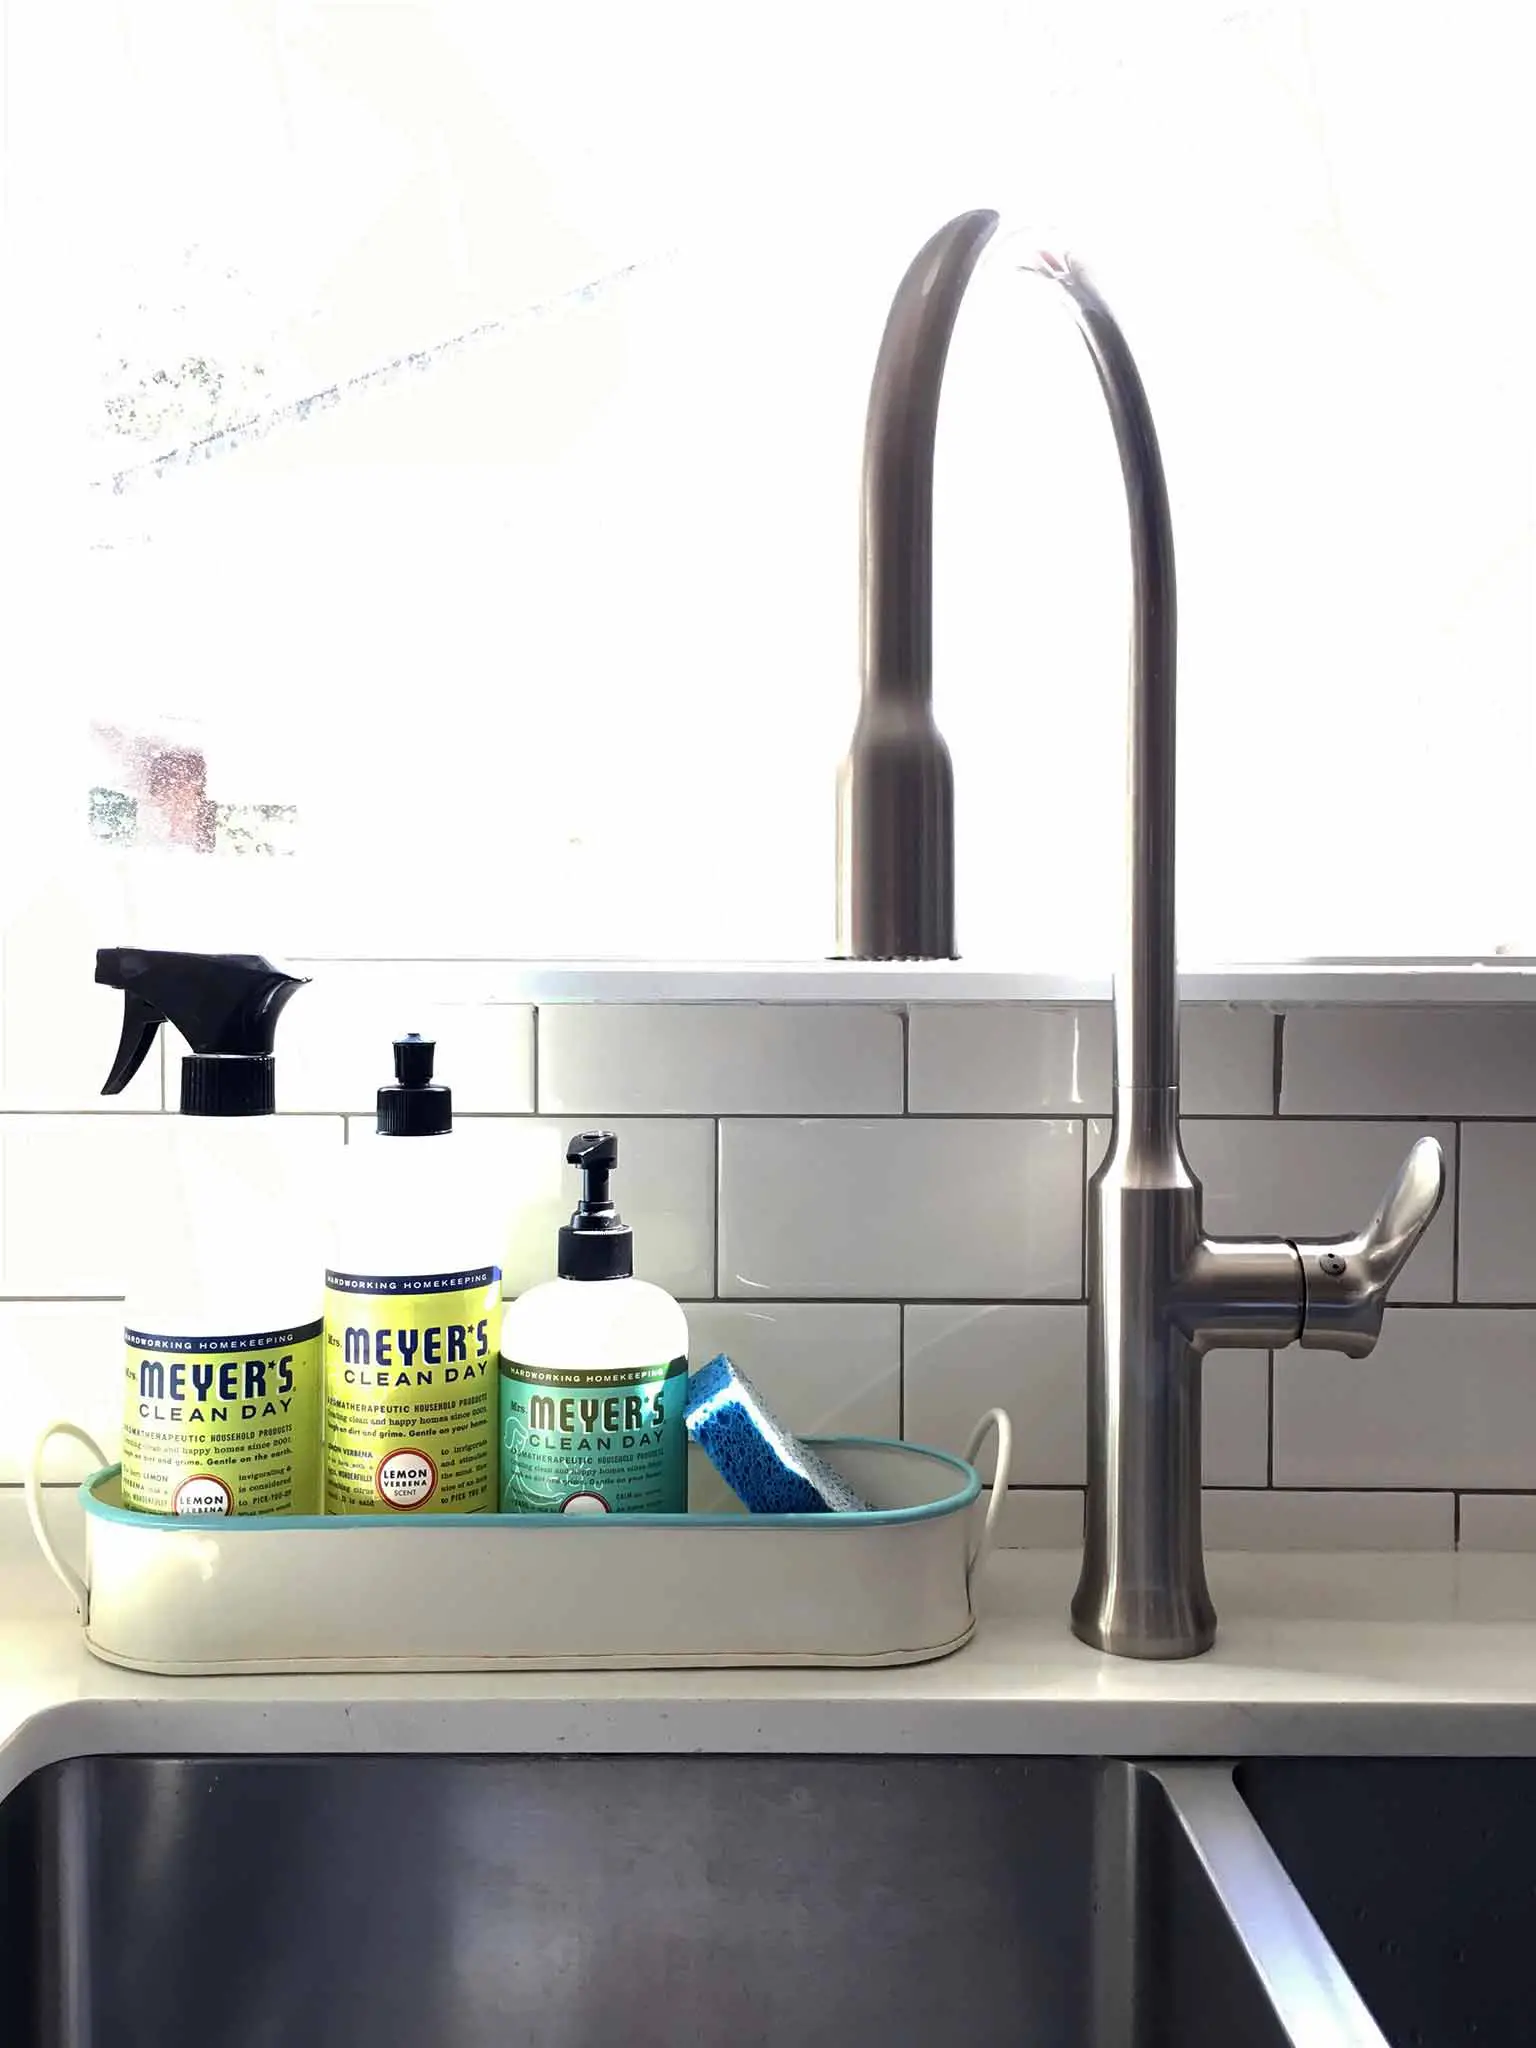 Sink Caddy with Mrs Meyers cleaning products